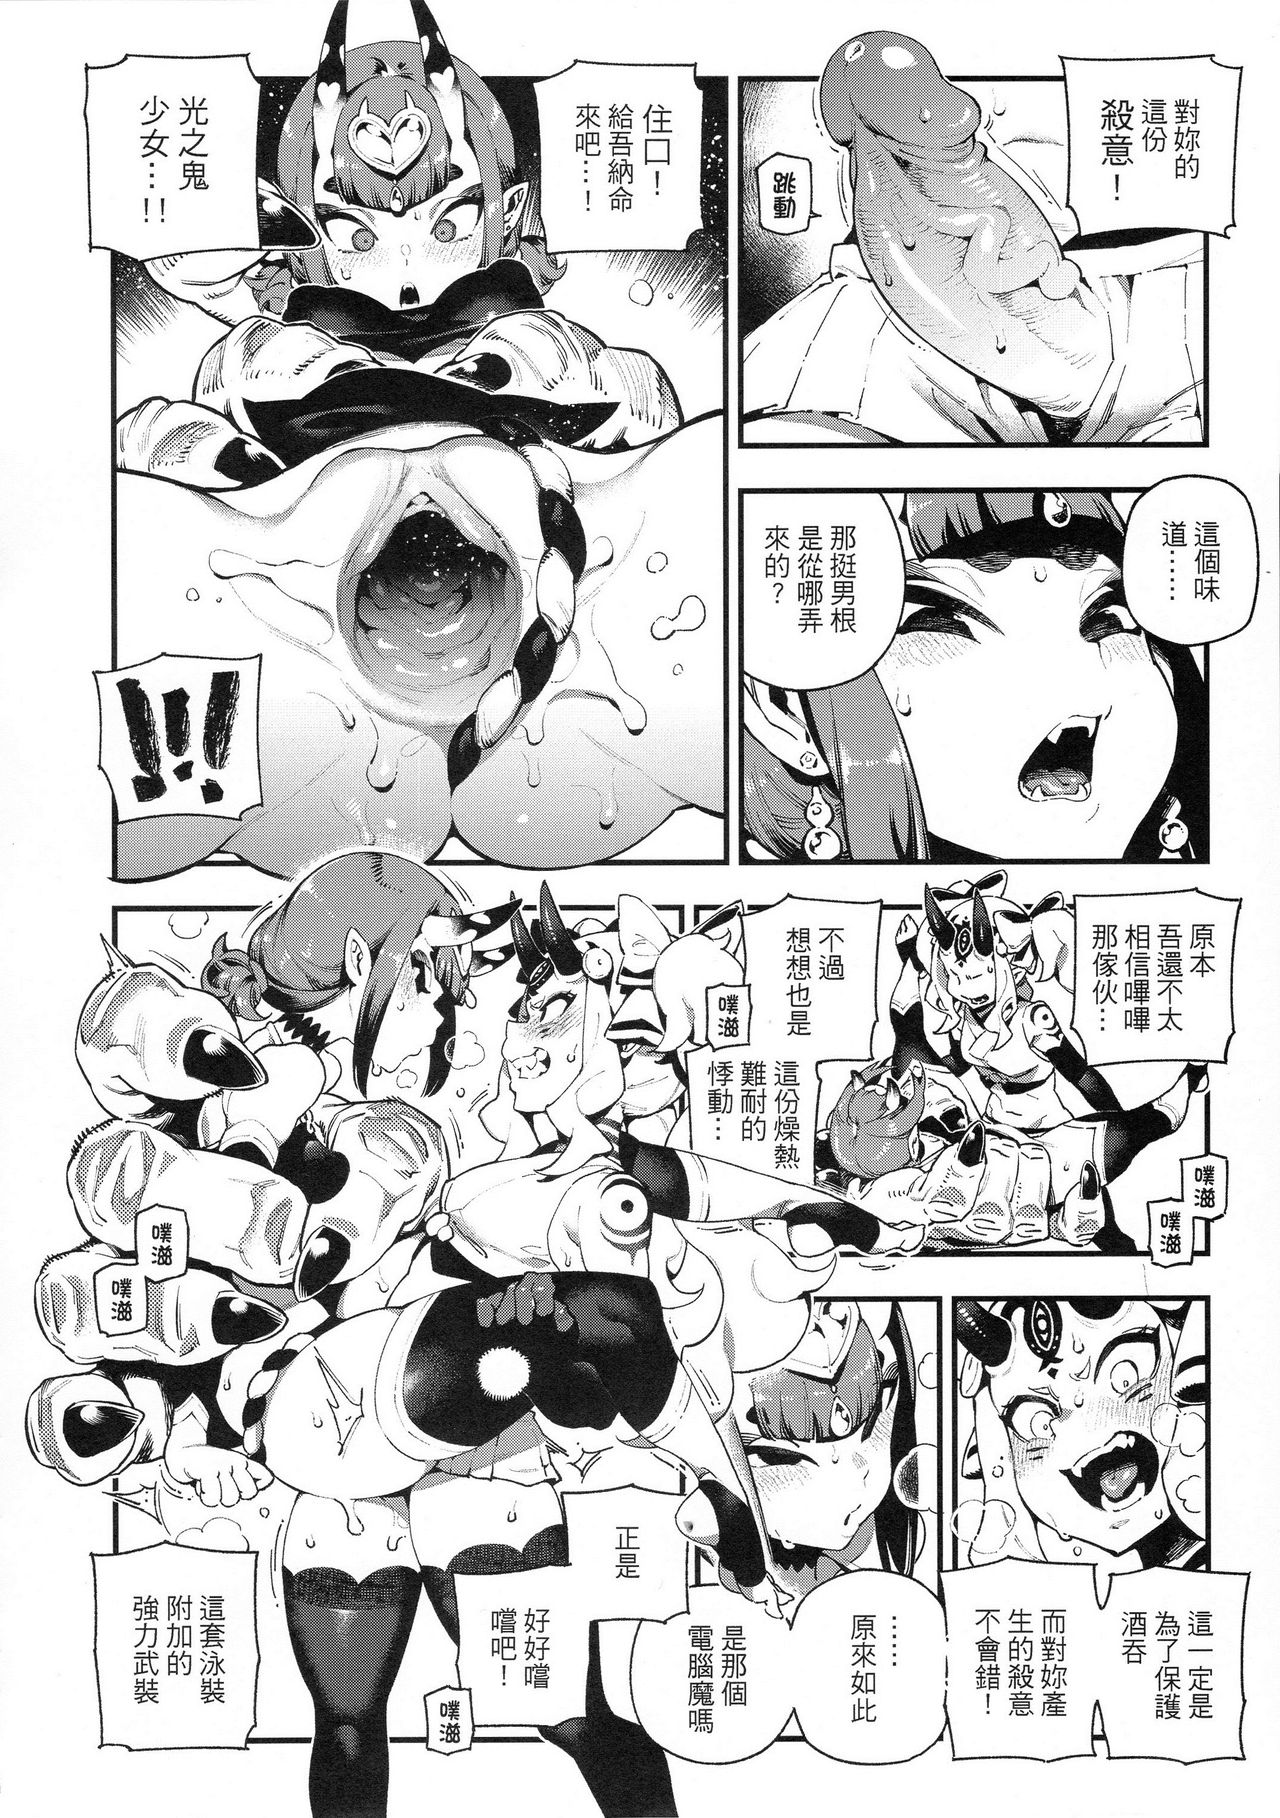 (FF33) [Bear Hand (Fishine, Ireading)] JiaLeiDi KuangRe ． Guei & Mo (Fate/Grand Order) [Chinese] (FF33) [熊掌社 (魚生、俺正讀)] 迦勒底狂熱．鬼&魔 (Fate/Grand Order) [中国語]